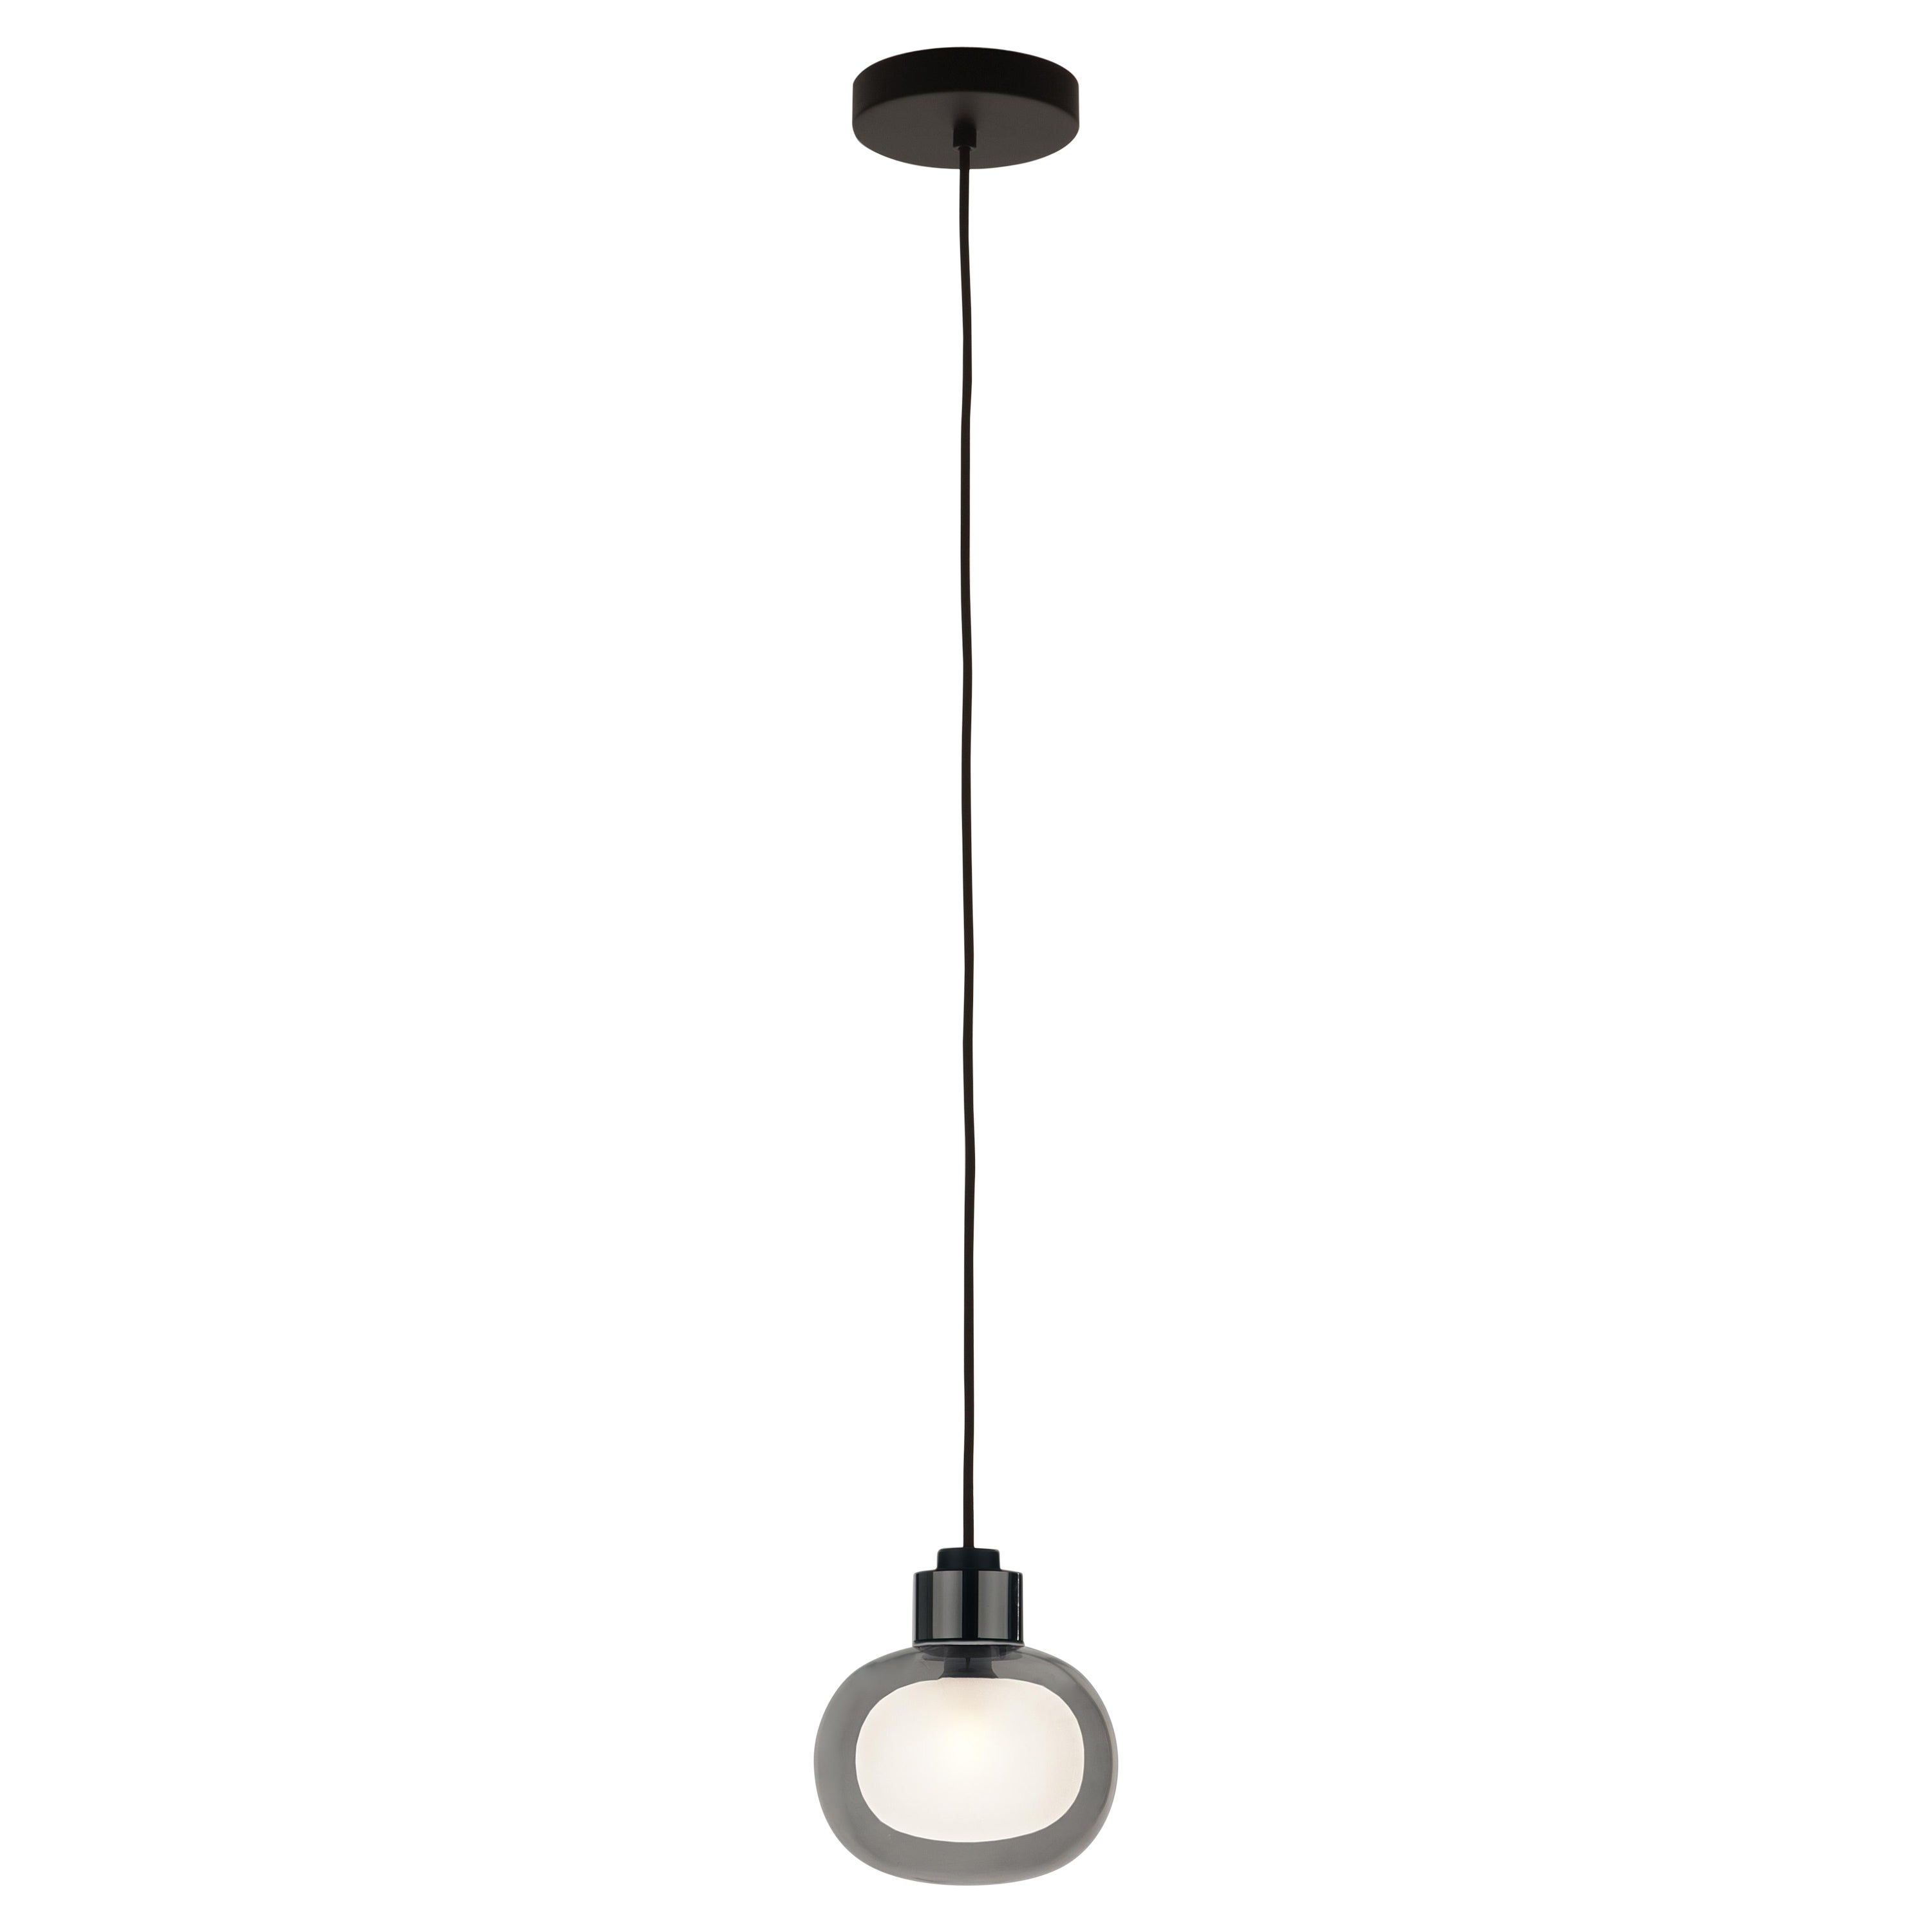 Contemporary Pendant Lamp 'Nabila 552.22' by Tooy, Black Chrome, Smoked Glass For Sale